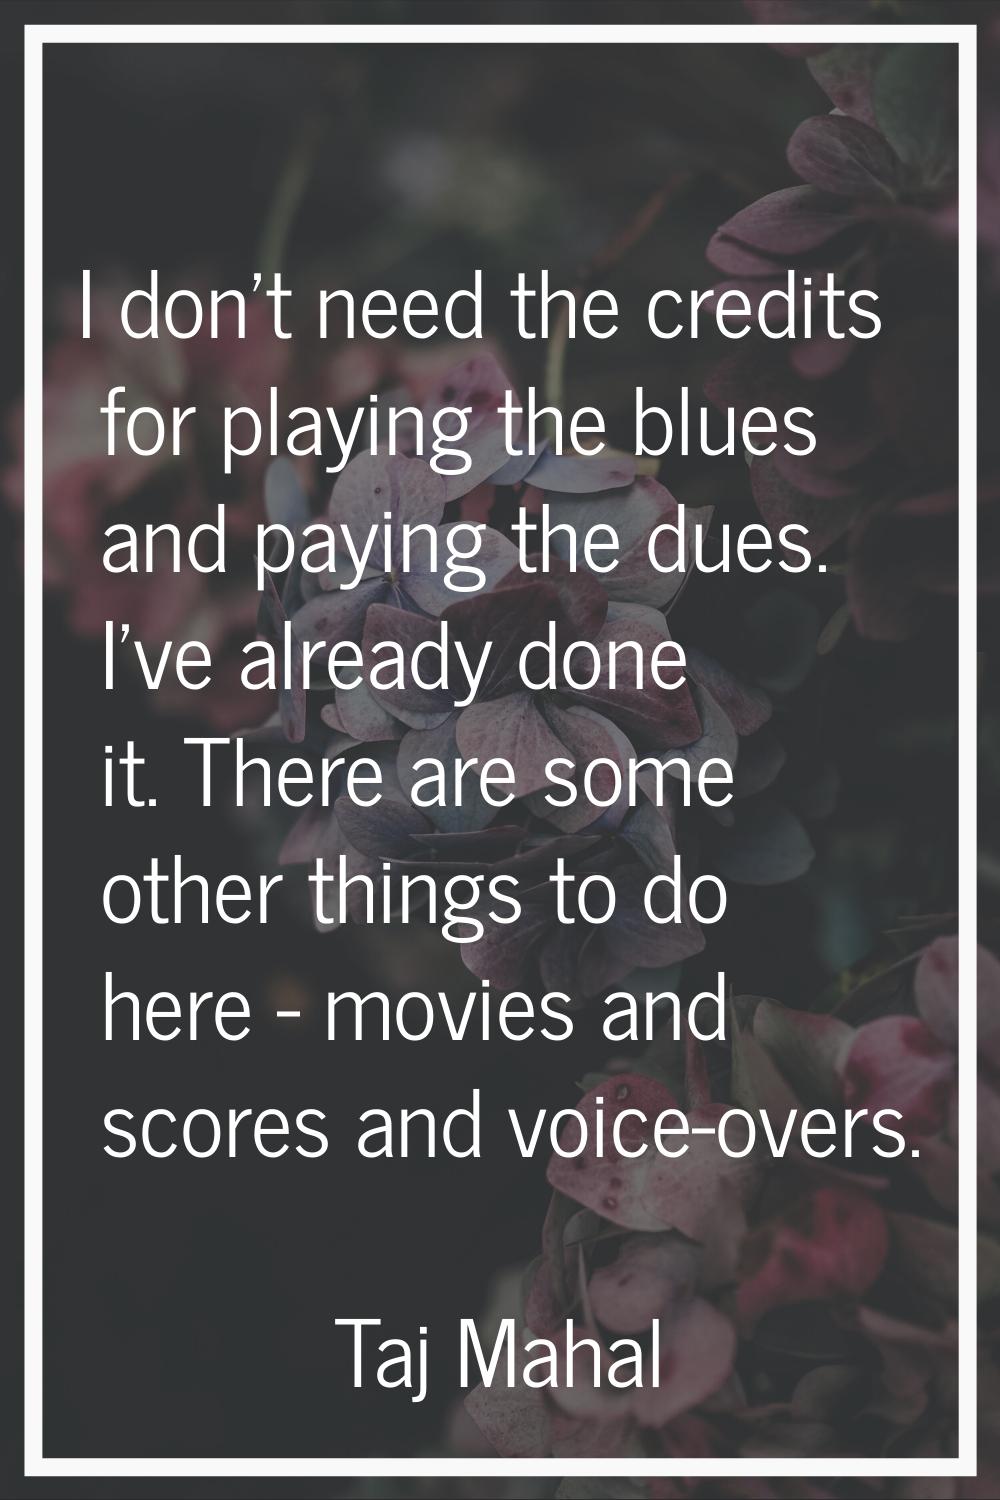 I don't need the credits for playing the blues and paying the dues. I've already done it. There are